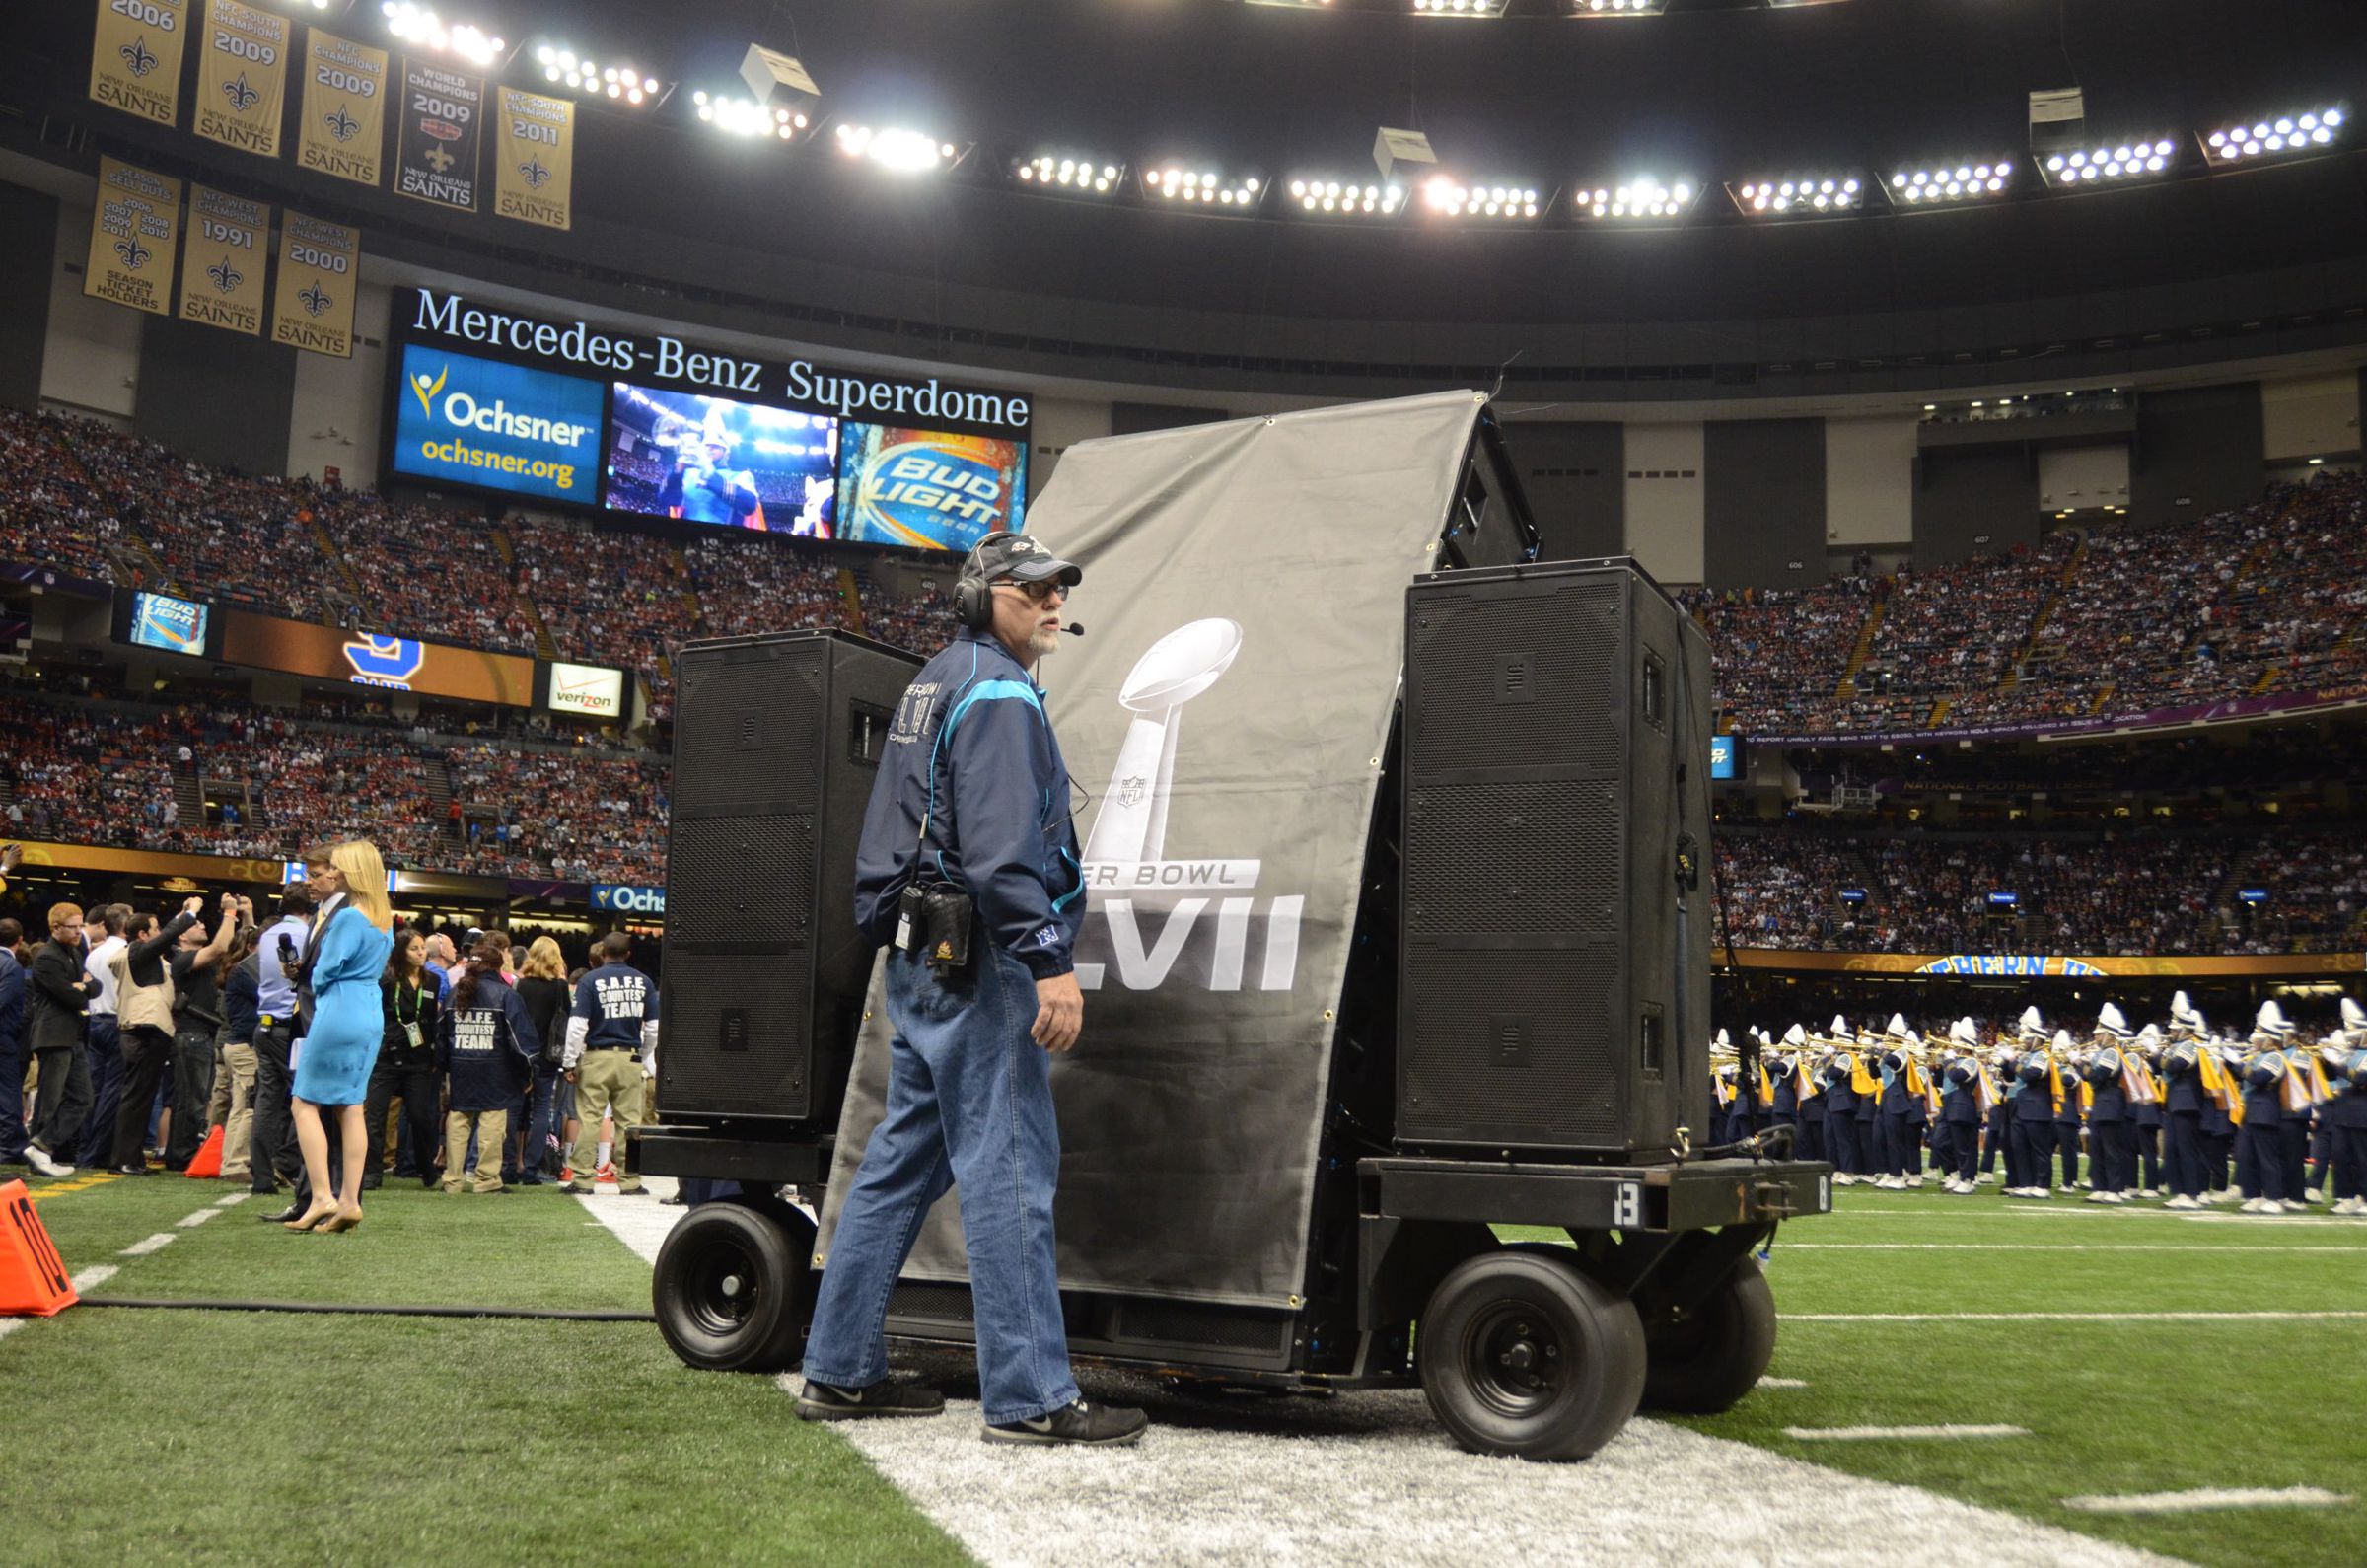 The speaker carts used at the Super Bowl